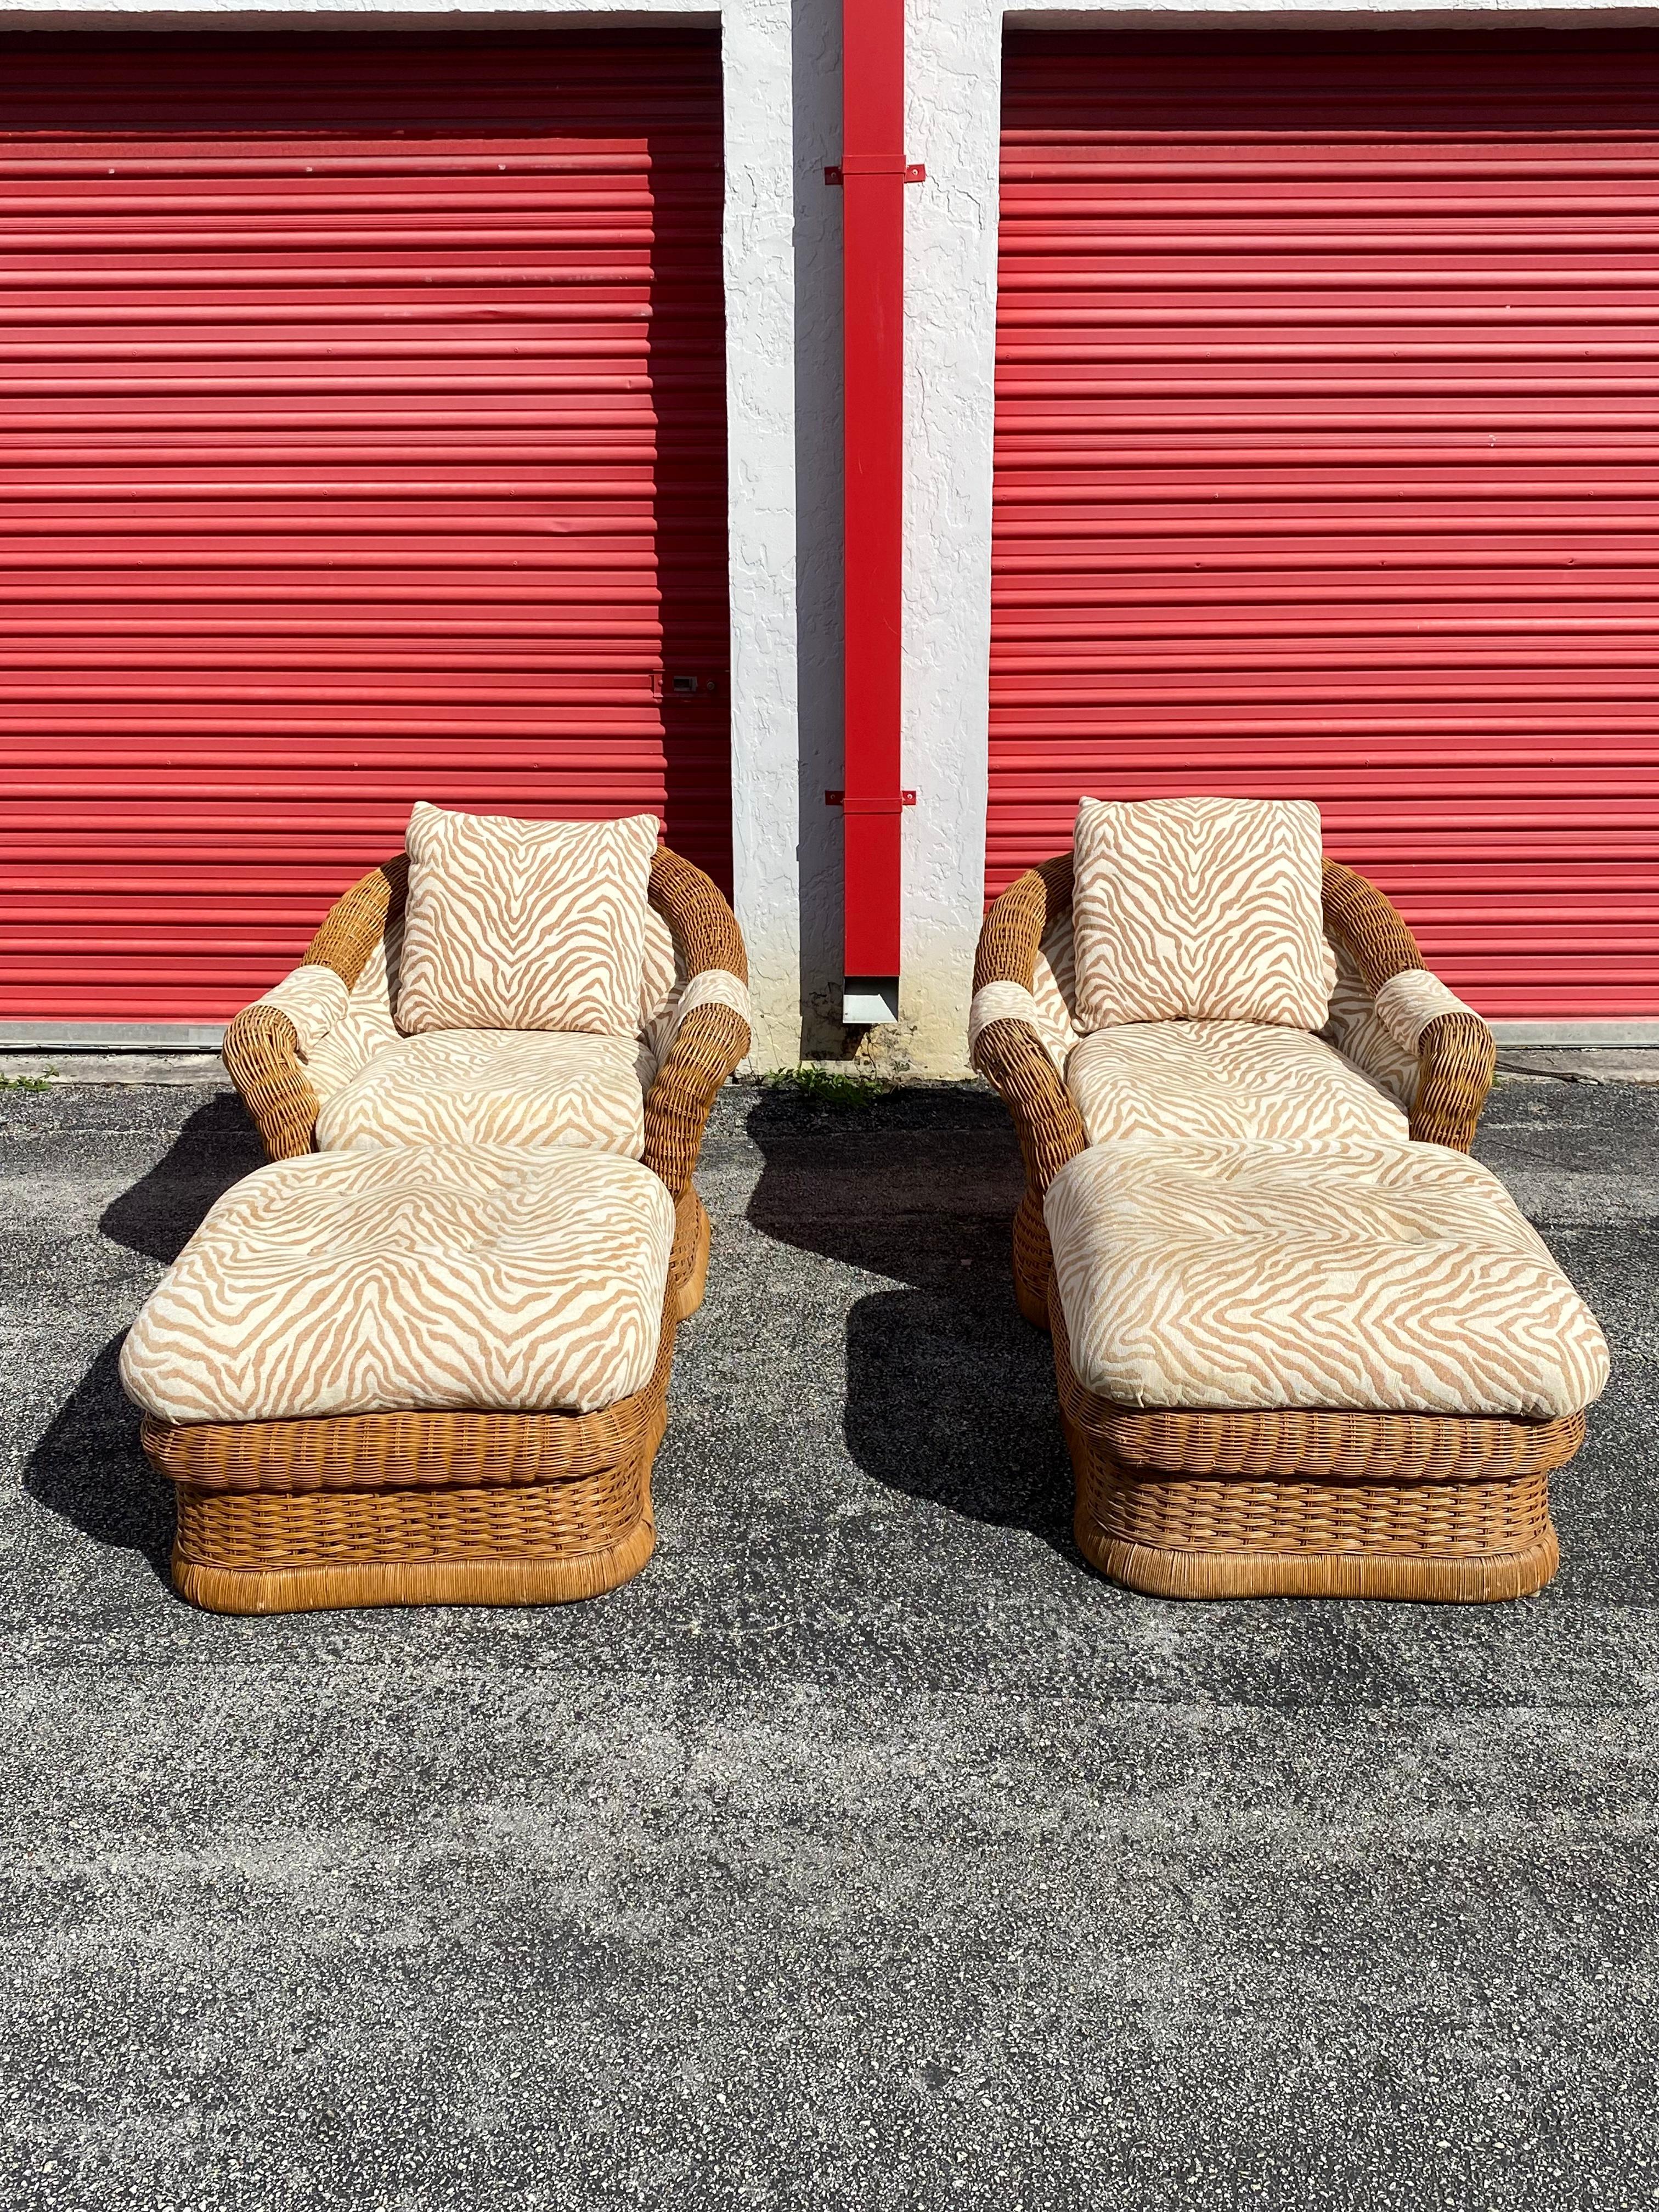 The beautiful rare collection is statement piece which is also extremely comfortable and packed with personality! We are delighted to offer for sale this absolutely stunning, signature armchairs with matching large ottomans. Just look at the